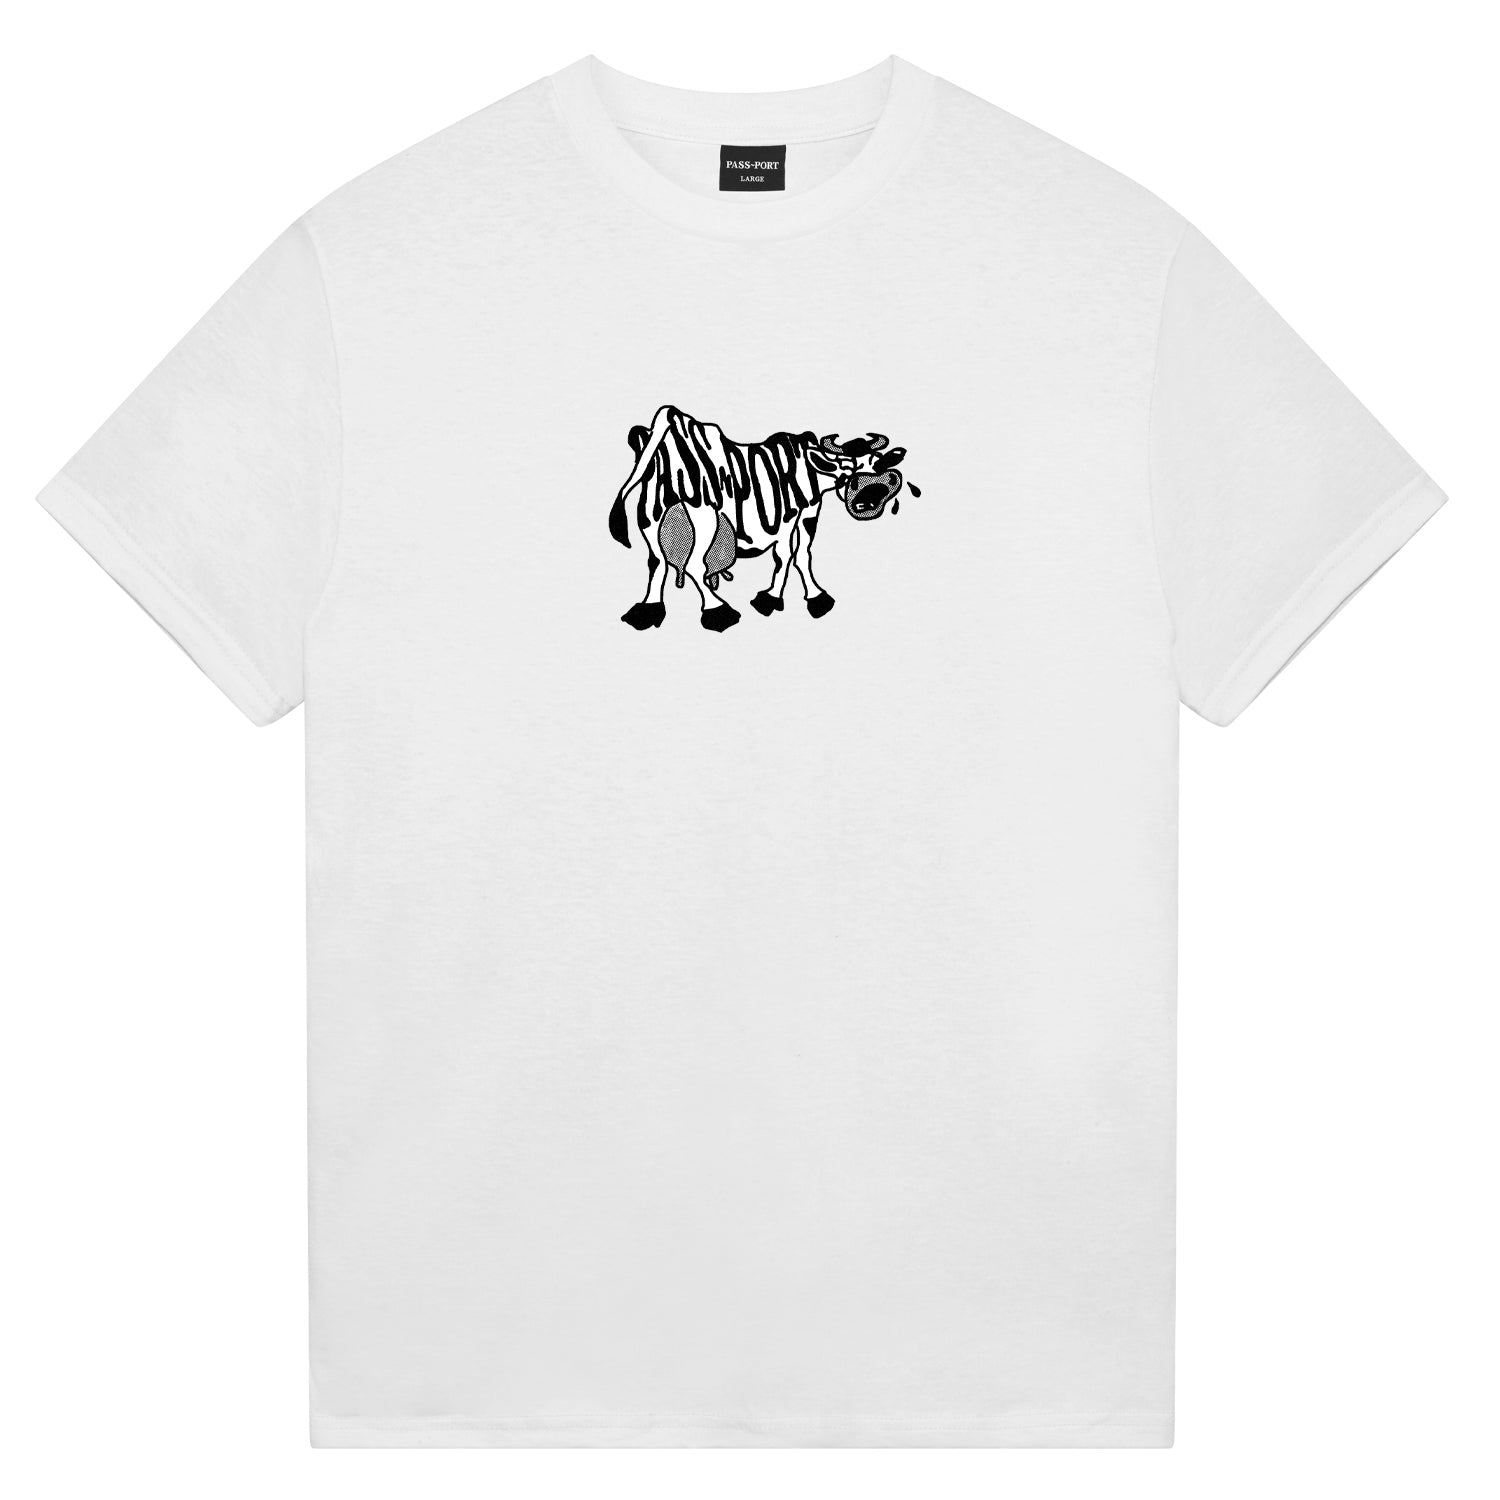 Crying Cow Tee, White